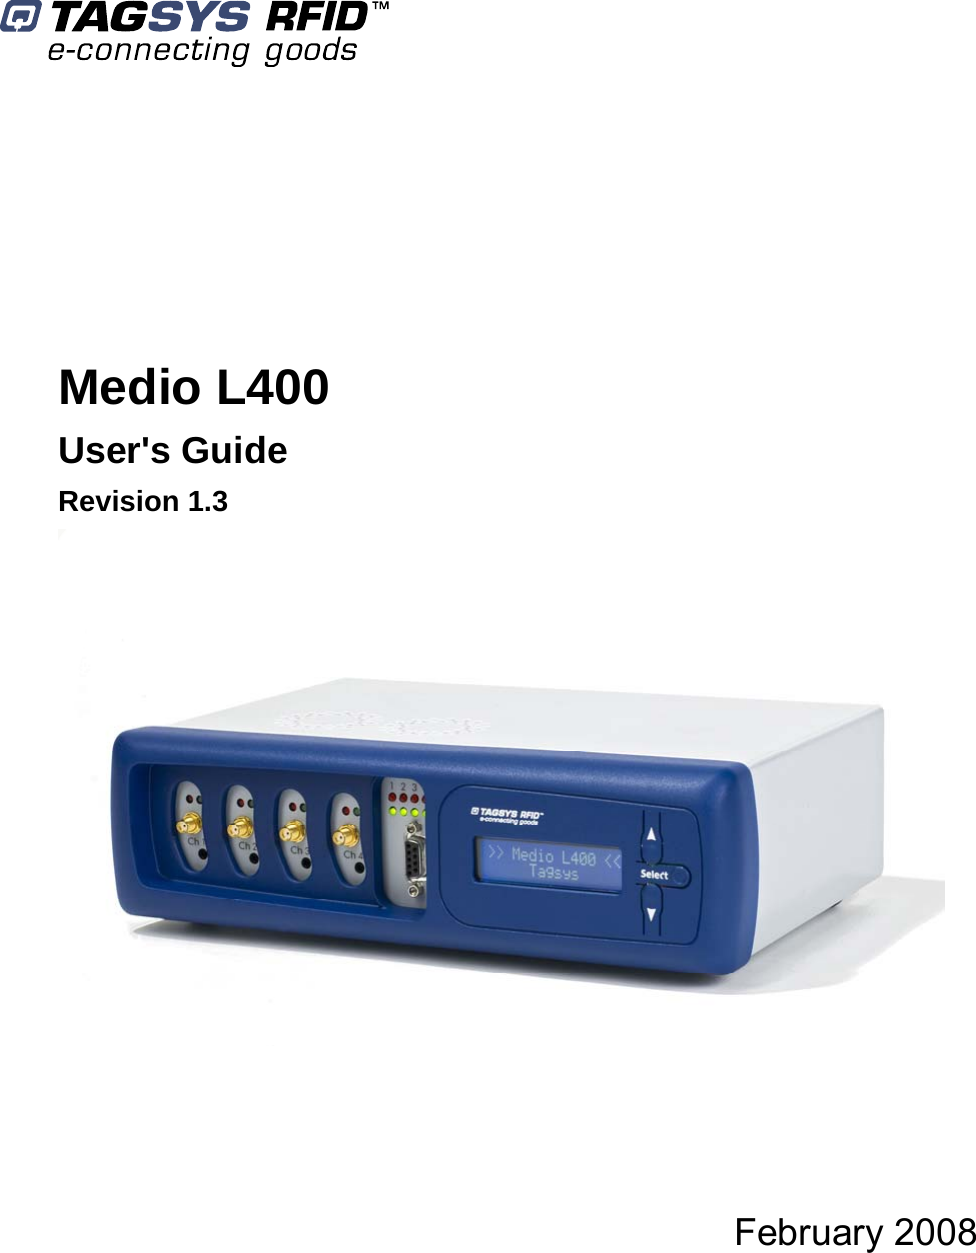    Medio L400 User&apos;s Guide Revision 1.3    February 2008   